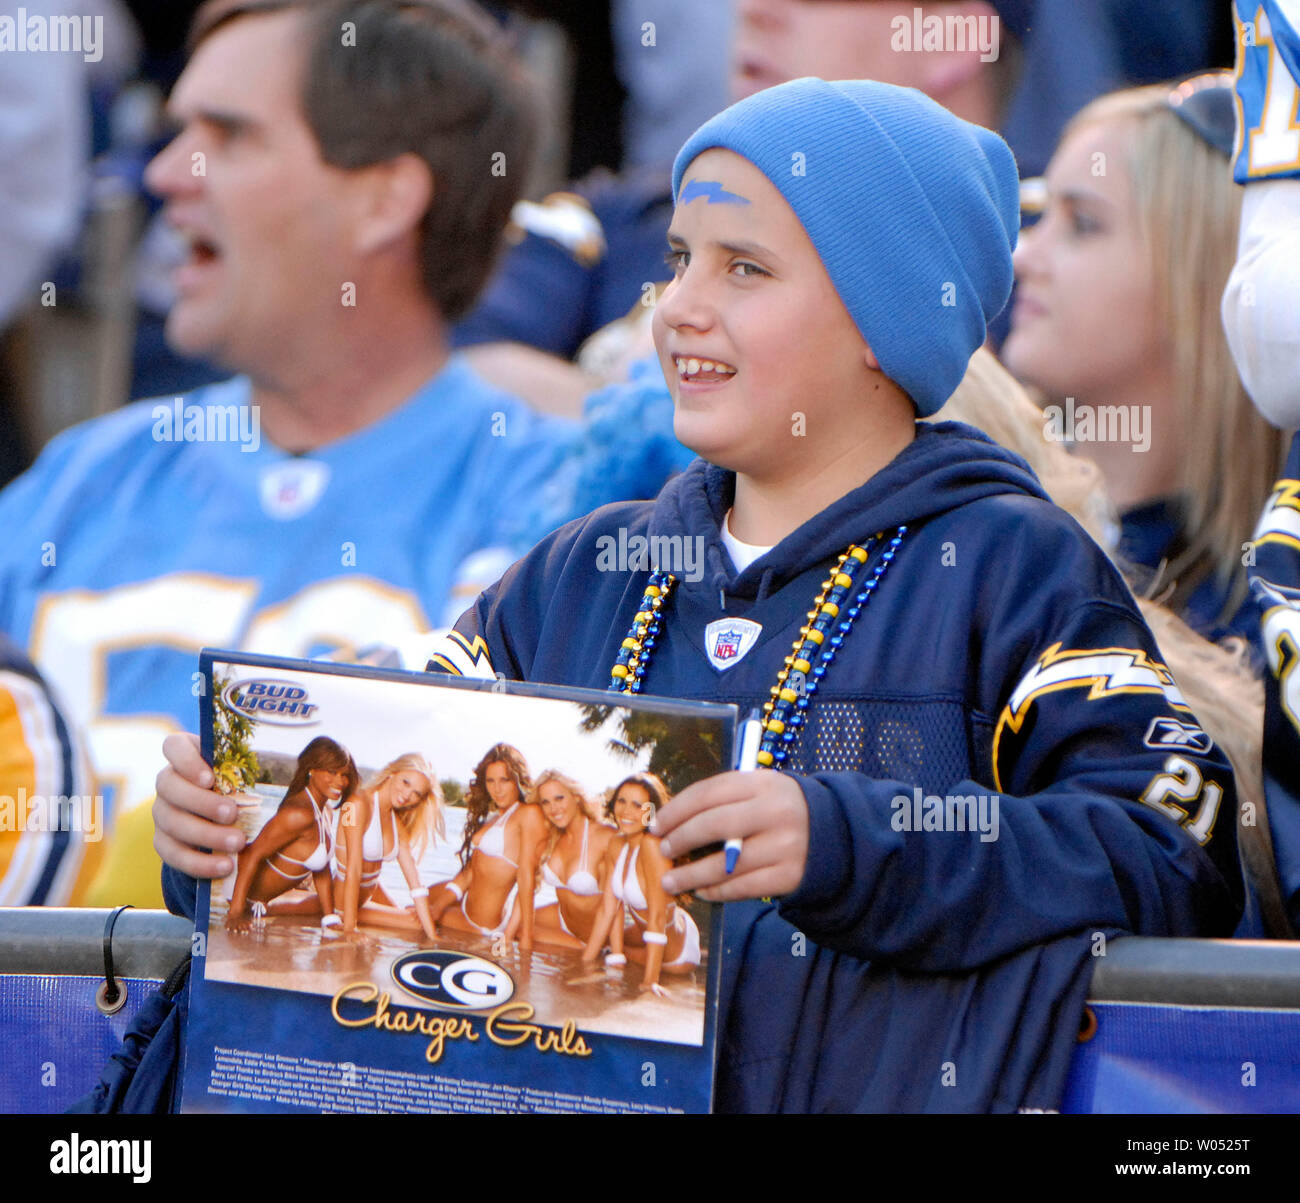 A young San Diego Charger fan tries to get autographs from Chargers cheerleaders during the Chargers win over the Arizona Cardinals at Qualcomm Stadium in San Diego on December 31, 2006. (UPI Photo/Earl S. Cryer) Stock Photo